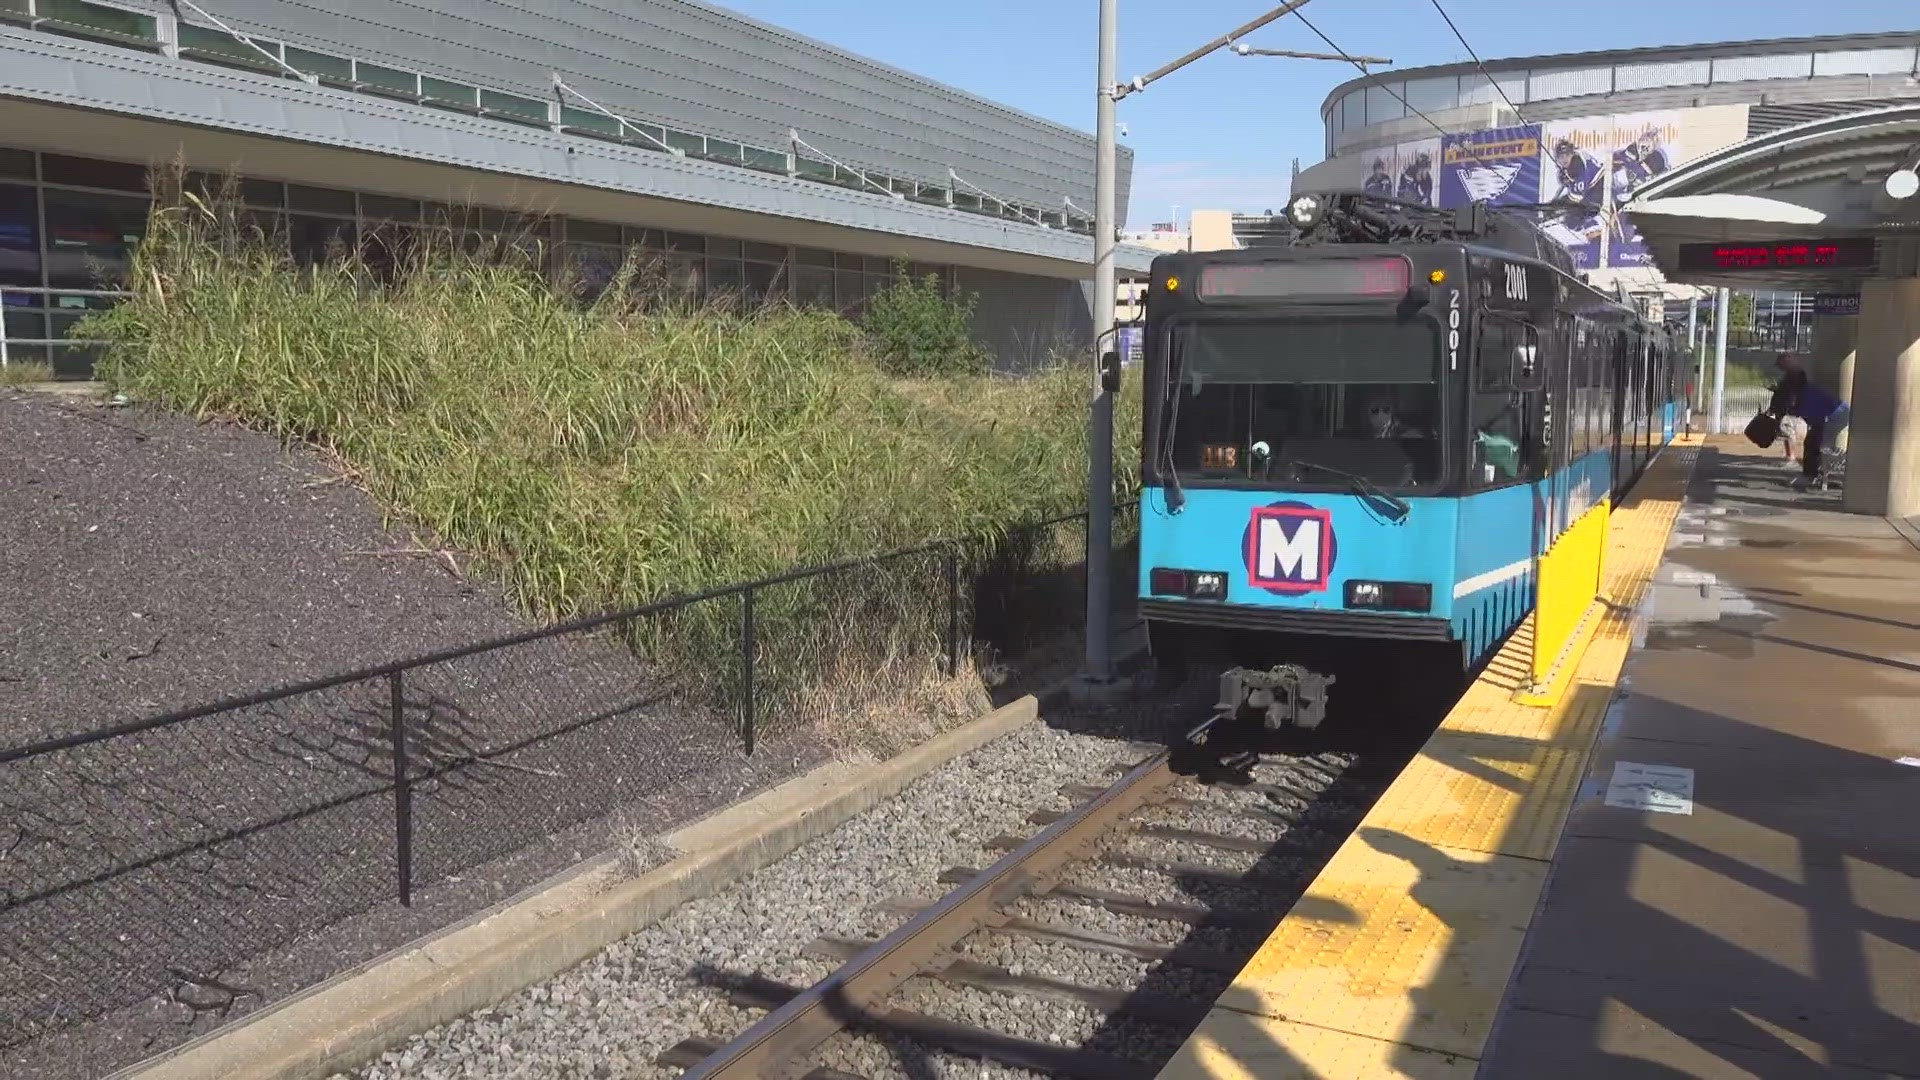 A $52 million security project is underway at MetroLink. The hope is to not only make MetroLink safer but to make sure people who use if feel safer, too.